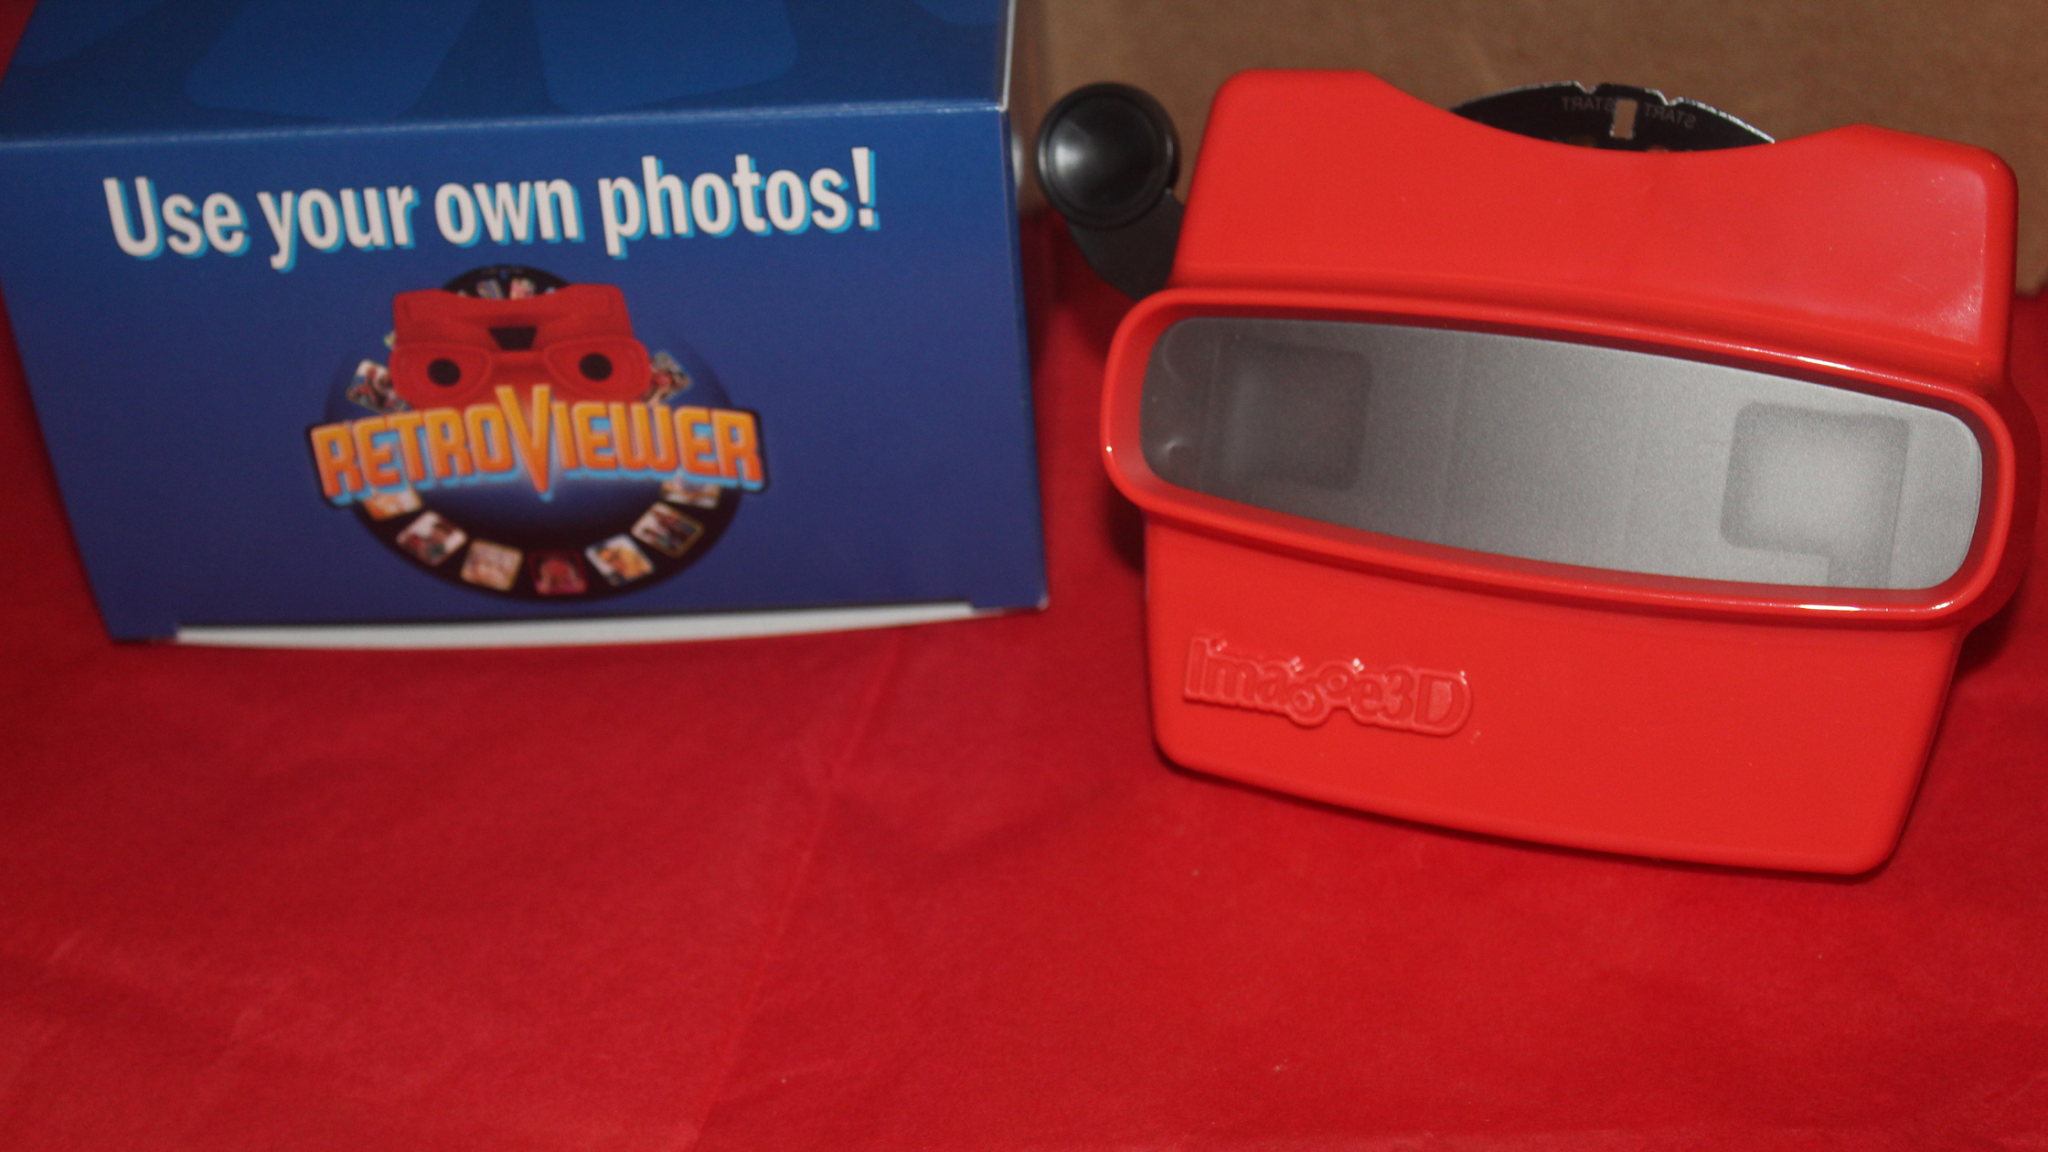 RetroViewer- The Personalized Photo Gift with a Pop of Nostalgia!  #MBPHoliday20 - Mommy's Block Party